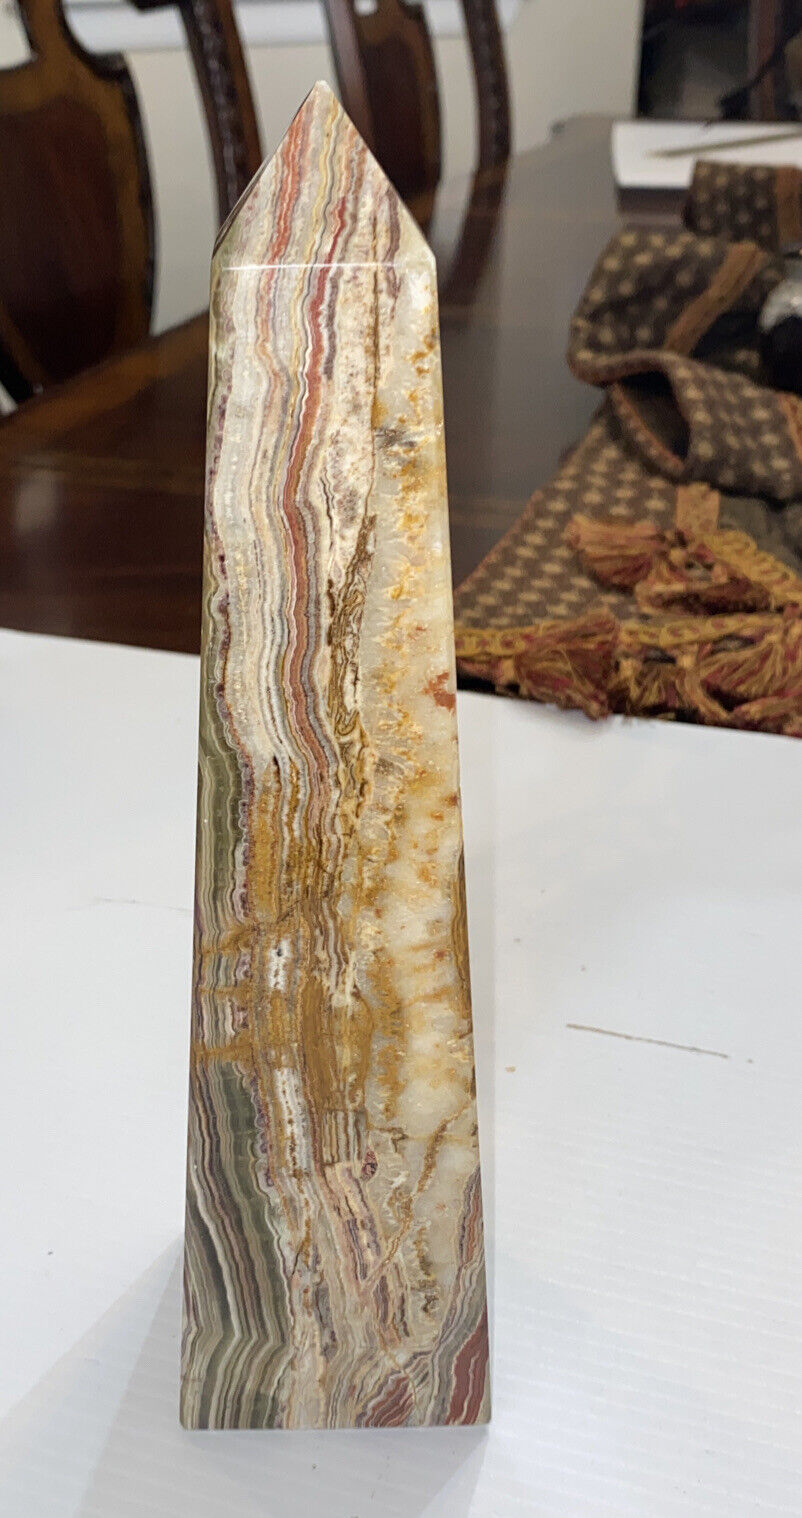 1577g calcium carbonate Onyx Polished Obelisk Tower 10” Tall Exceptional beauty